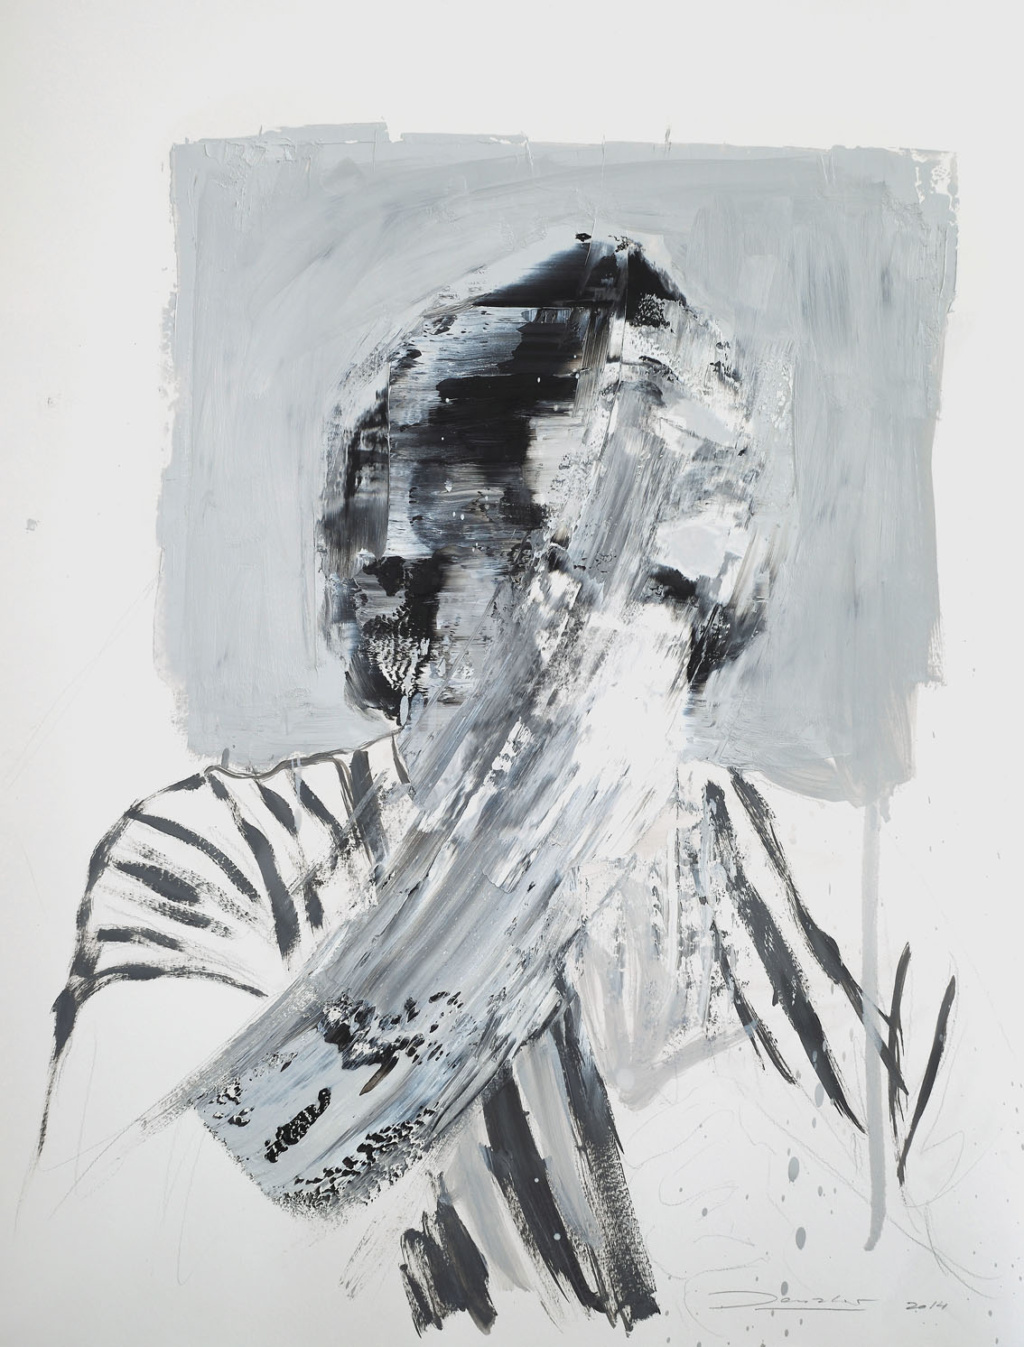 Andy Denzler, 2227, Condition III, 2014,
Oil on paper, 65 x 50 cm